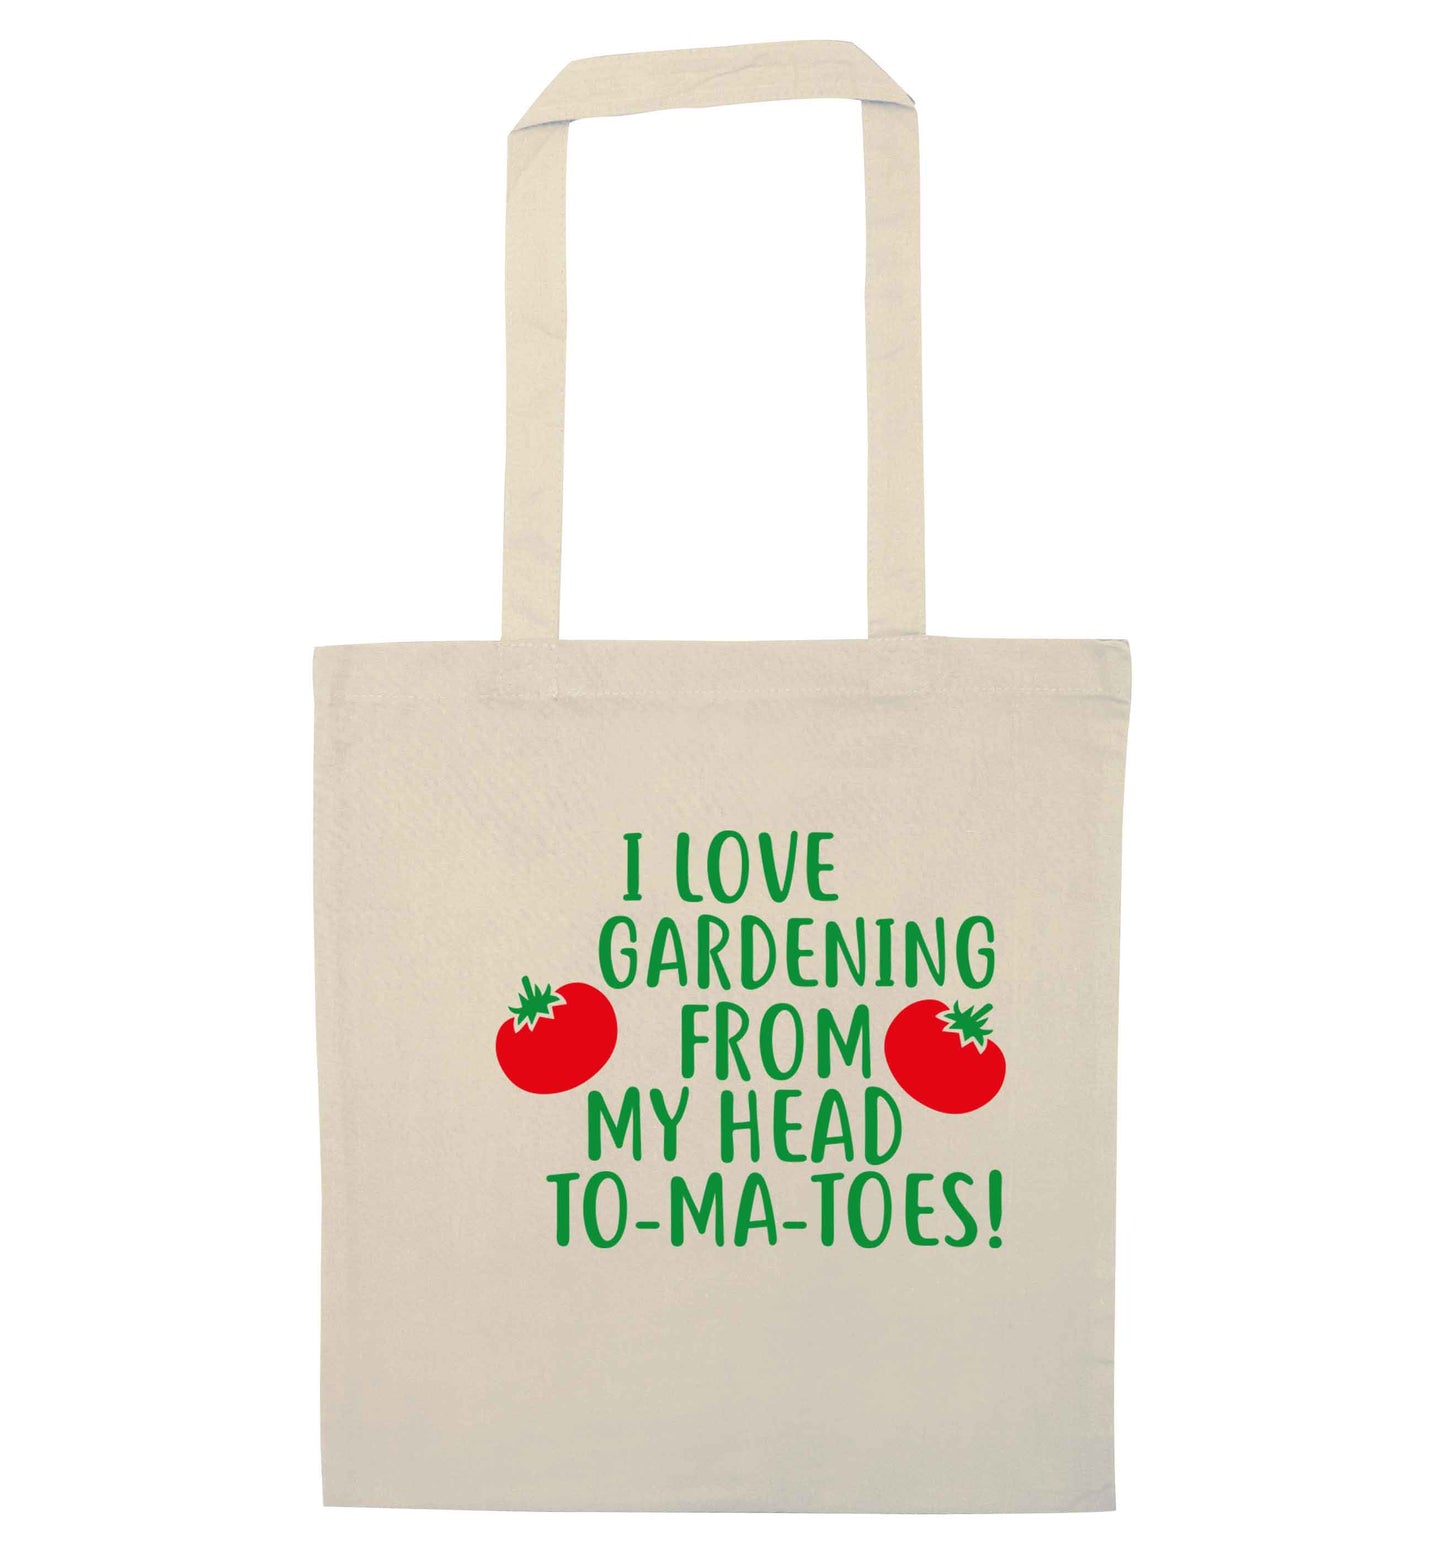 I love gardening from my head to-ma-toes natural tote bag